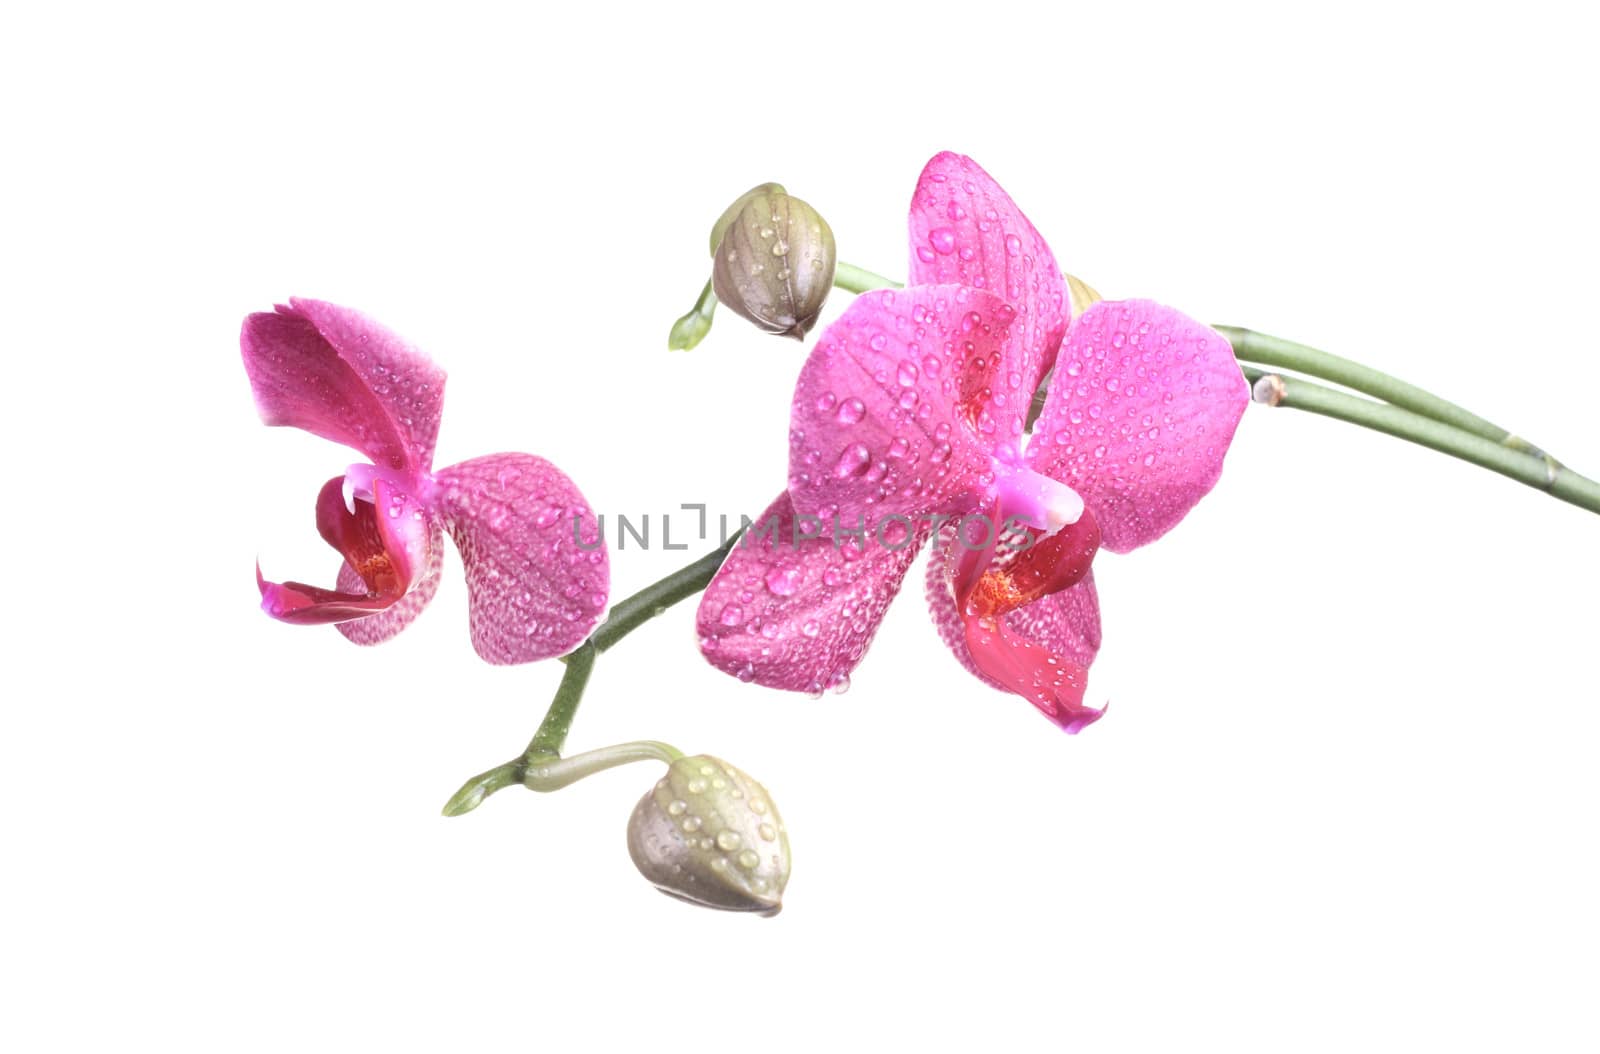 Orchid flower with bud at the branch at the white background